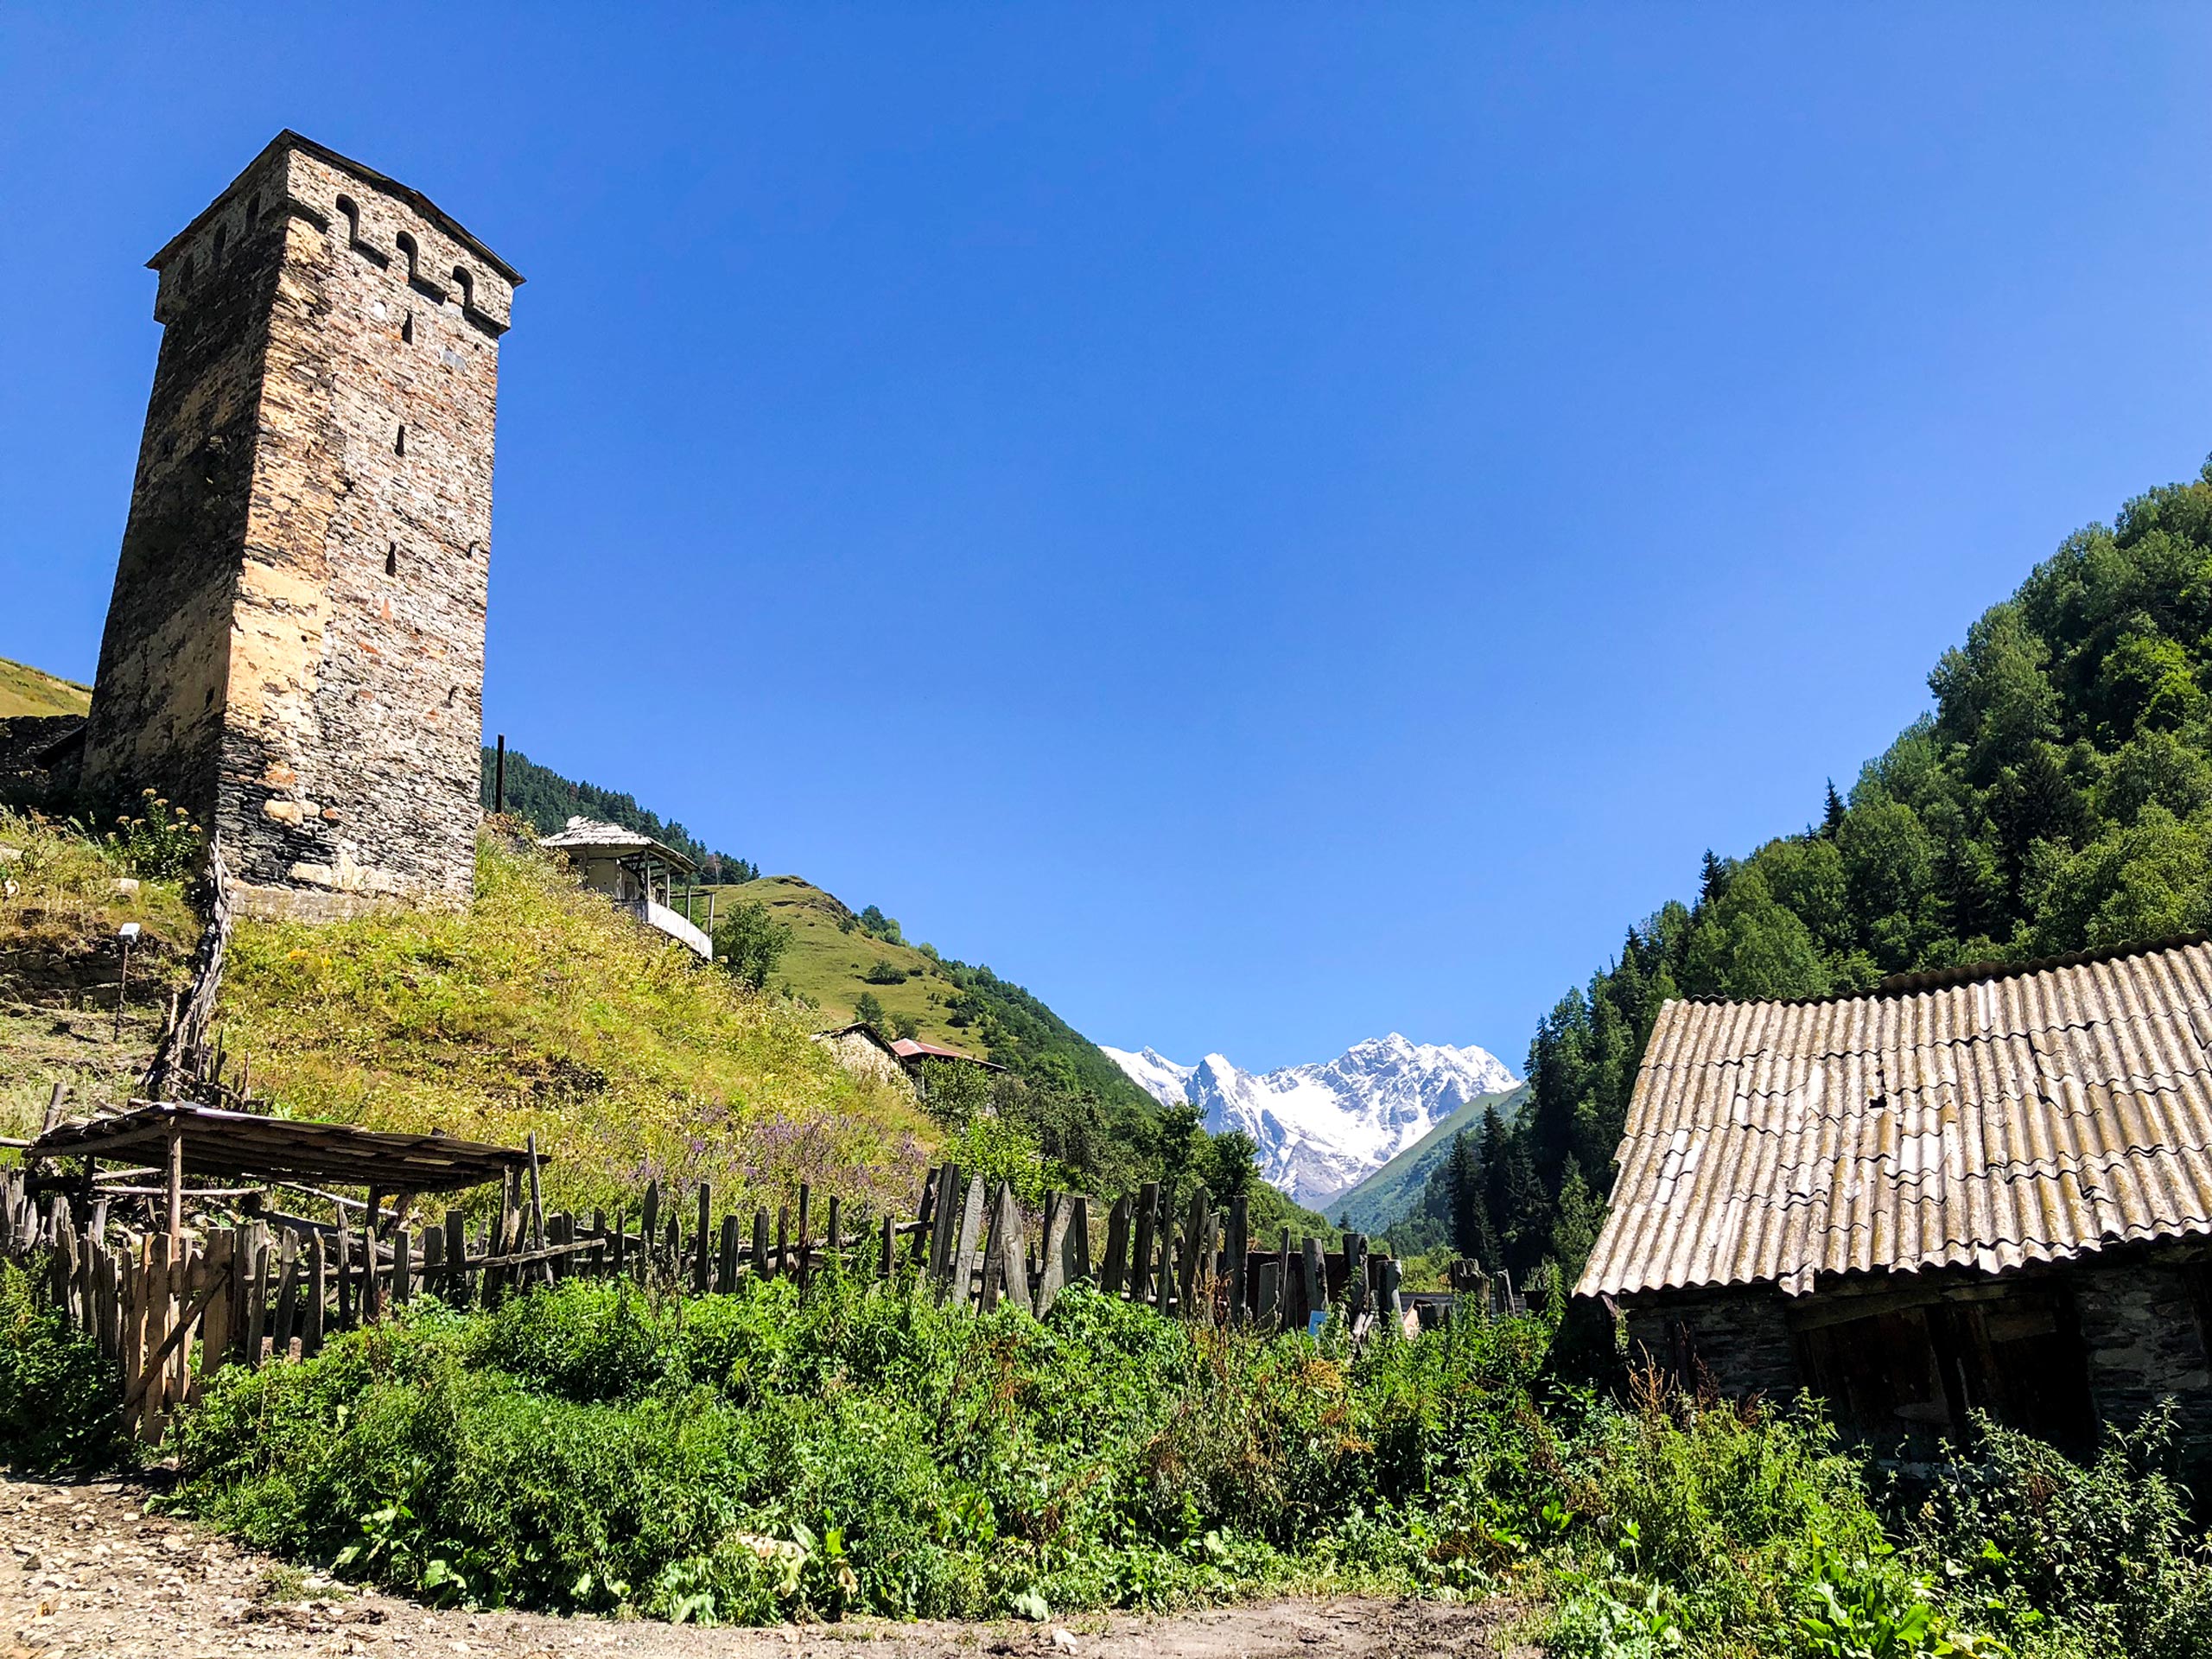 Tower on the hill in Svaneti